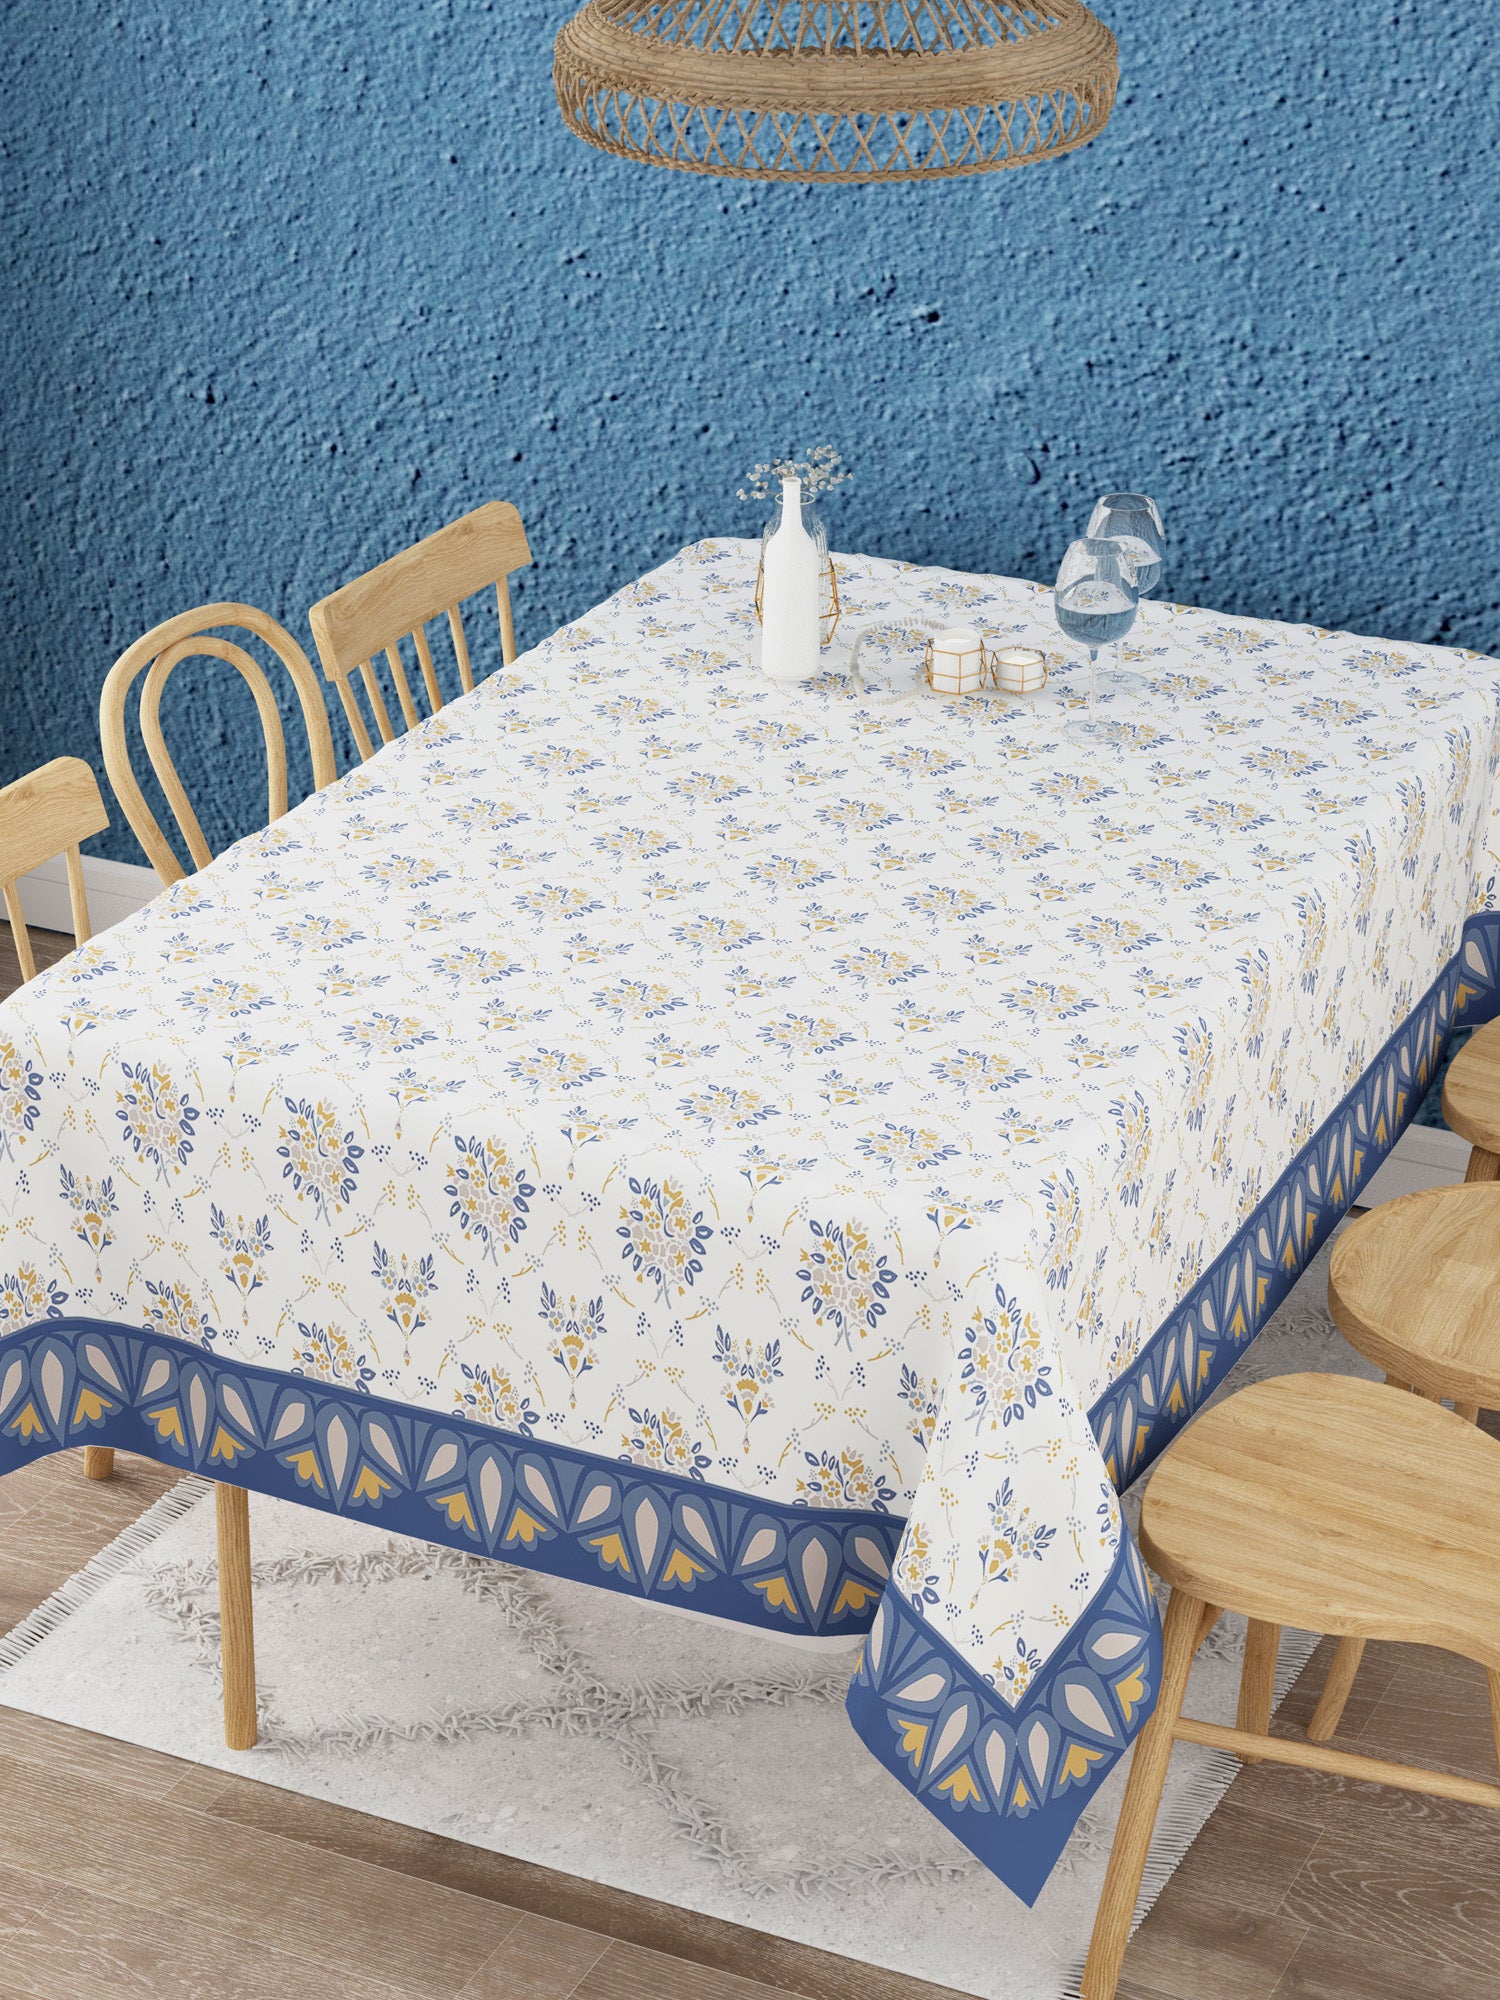 Abstract Print Table Cover